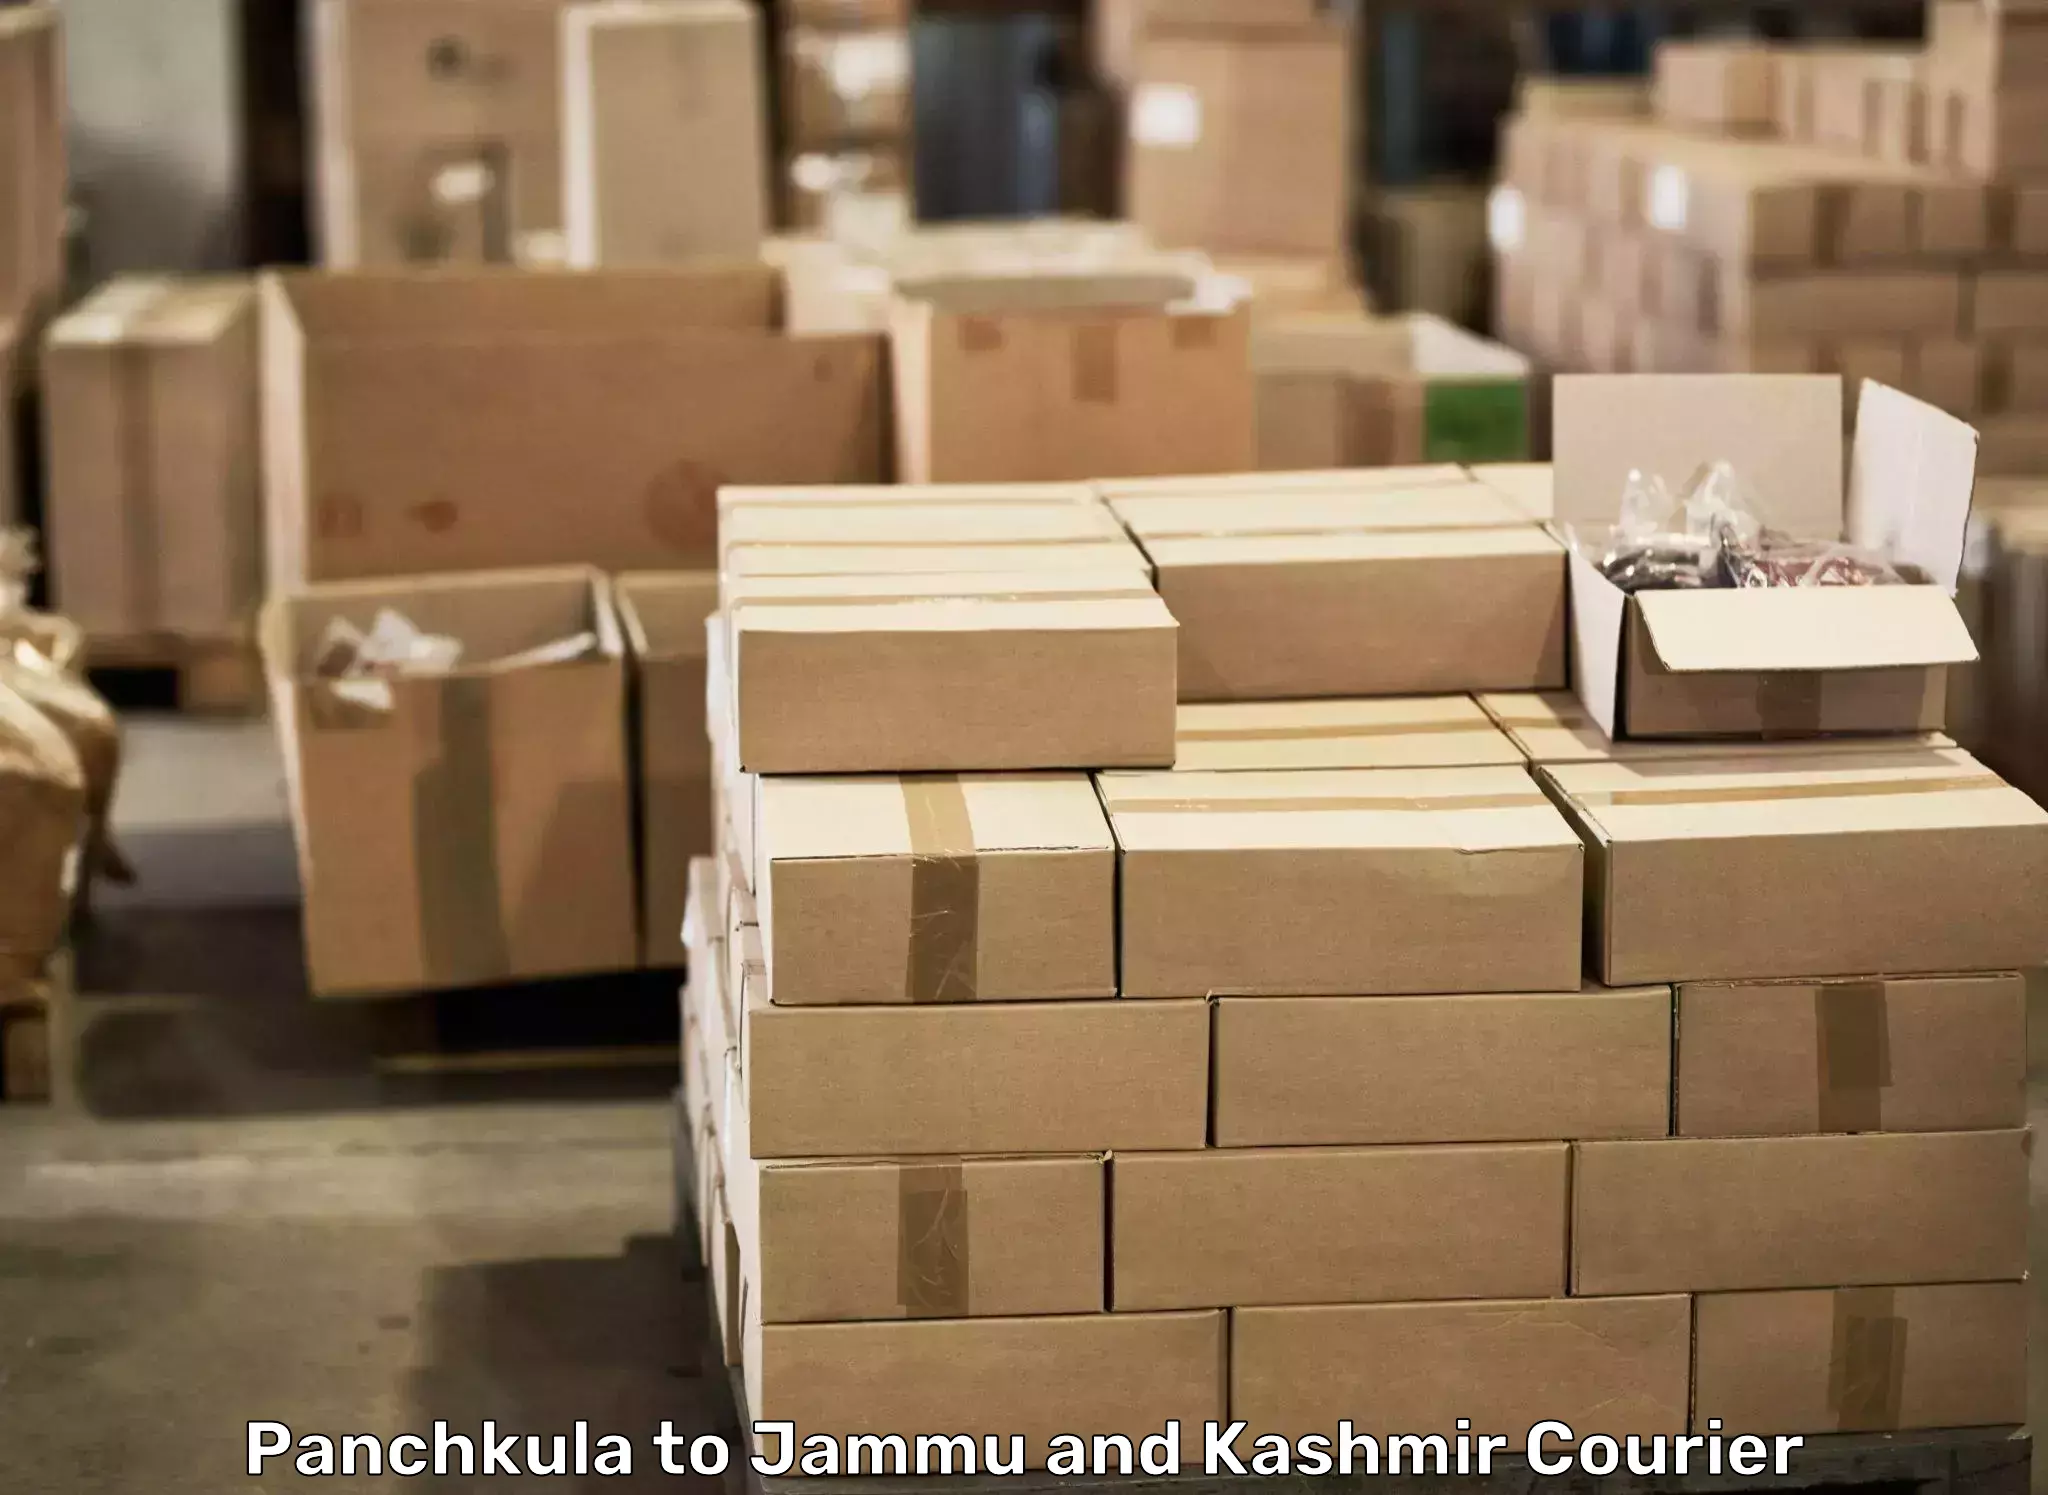 Trusted relocation experts Panchkula to Sopore